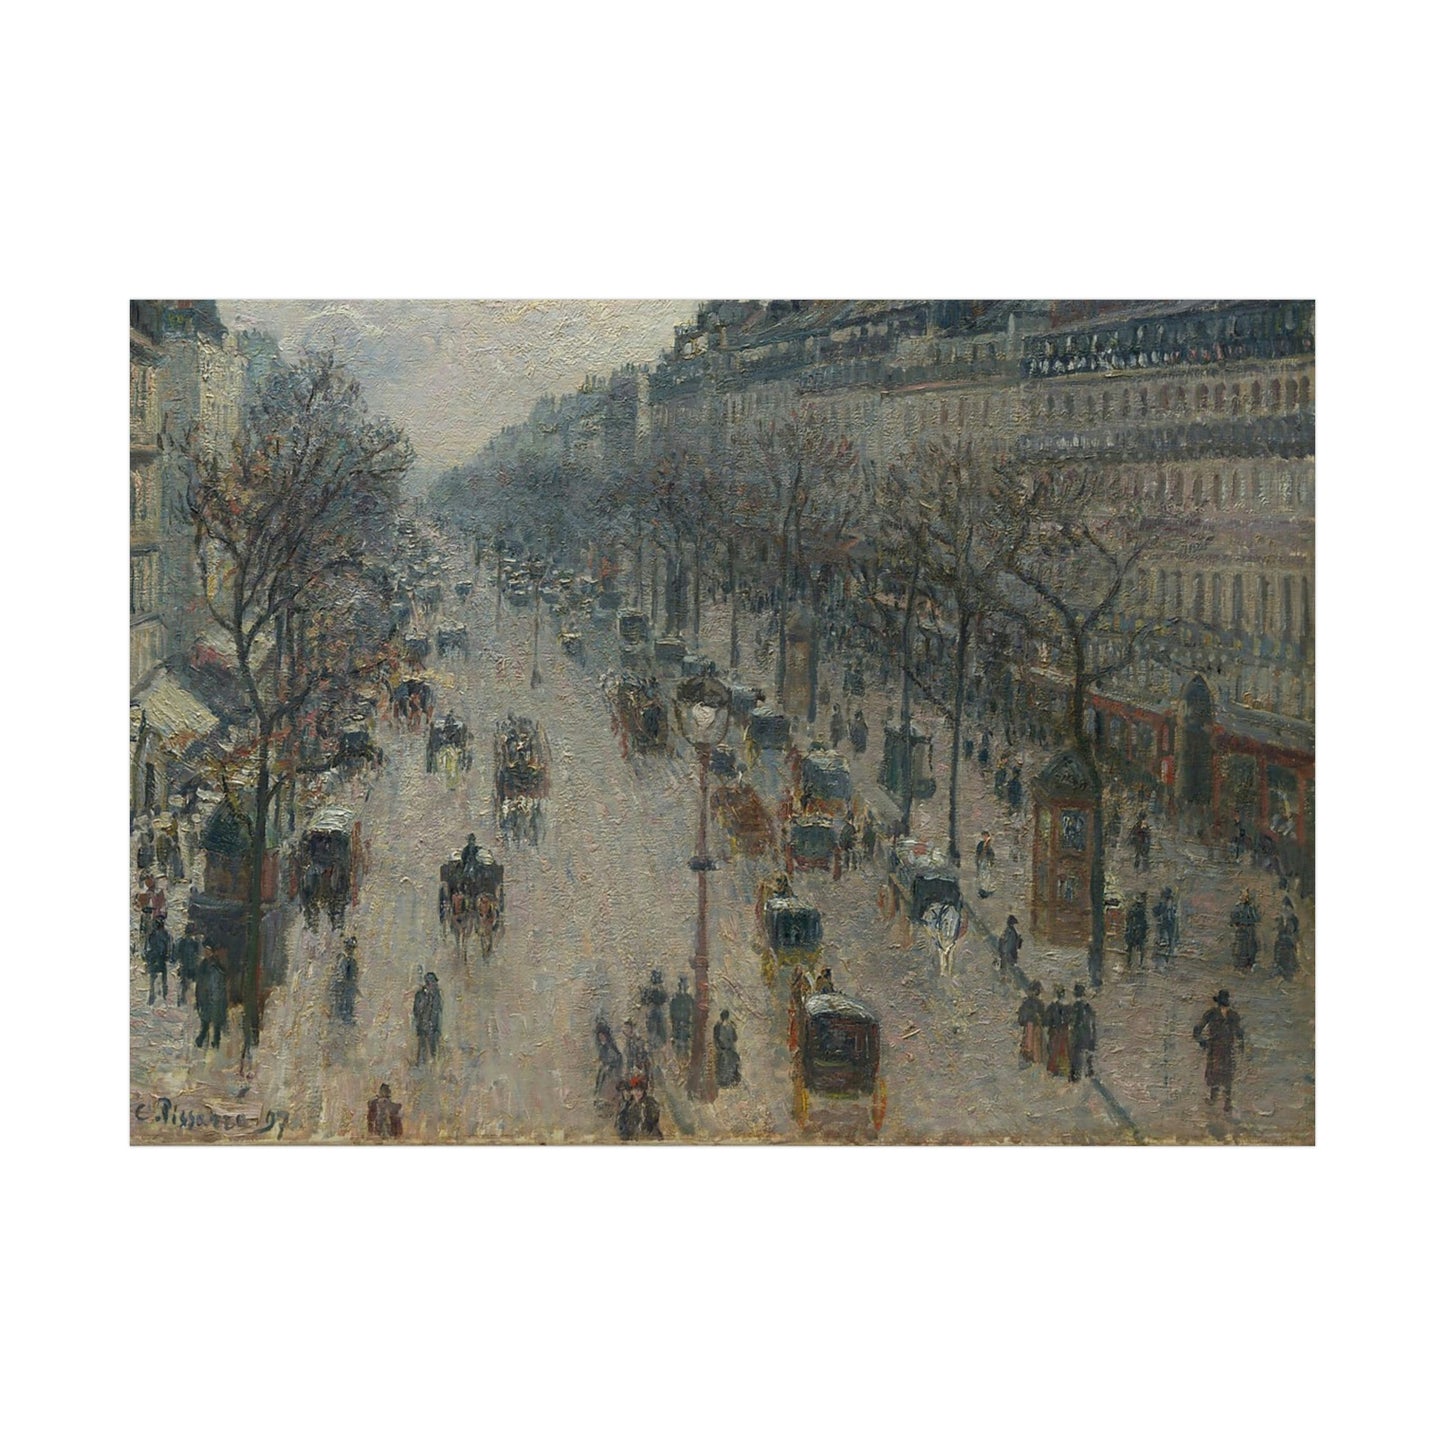 The Boulevard Montmartre on a Winter Morning - Camille Pissarro - 1897 - Rolled Posters